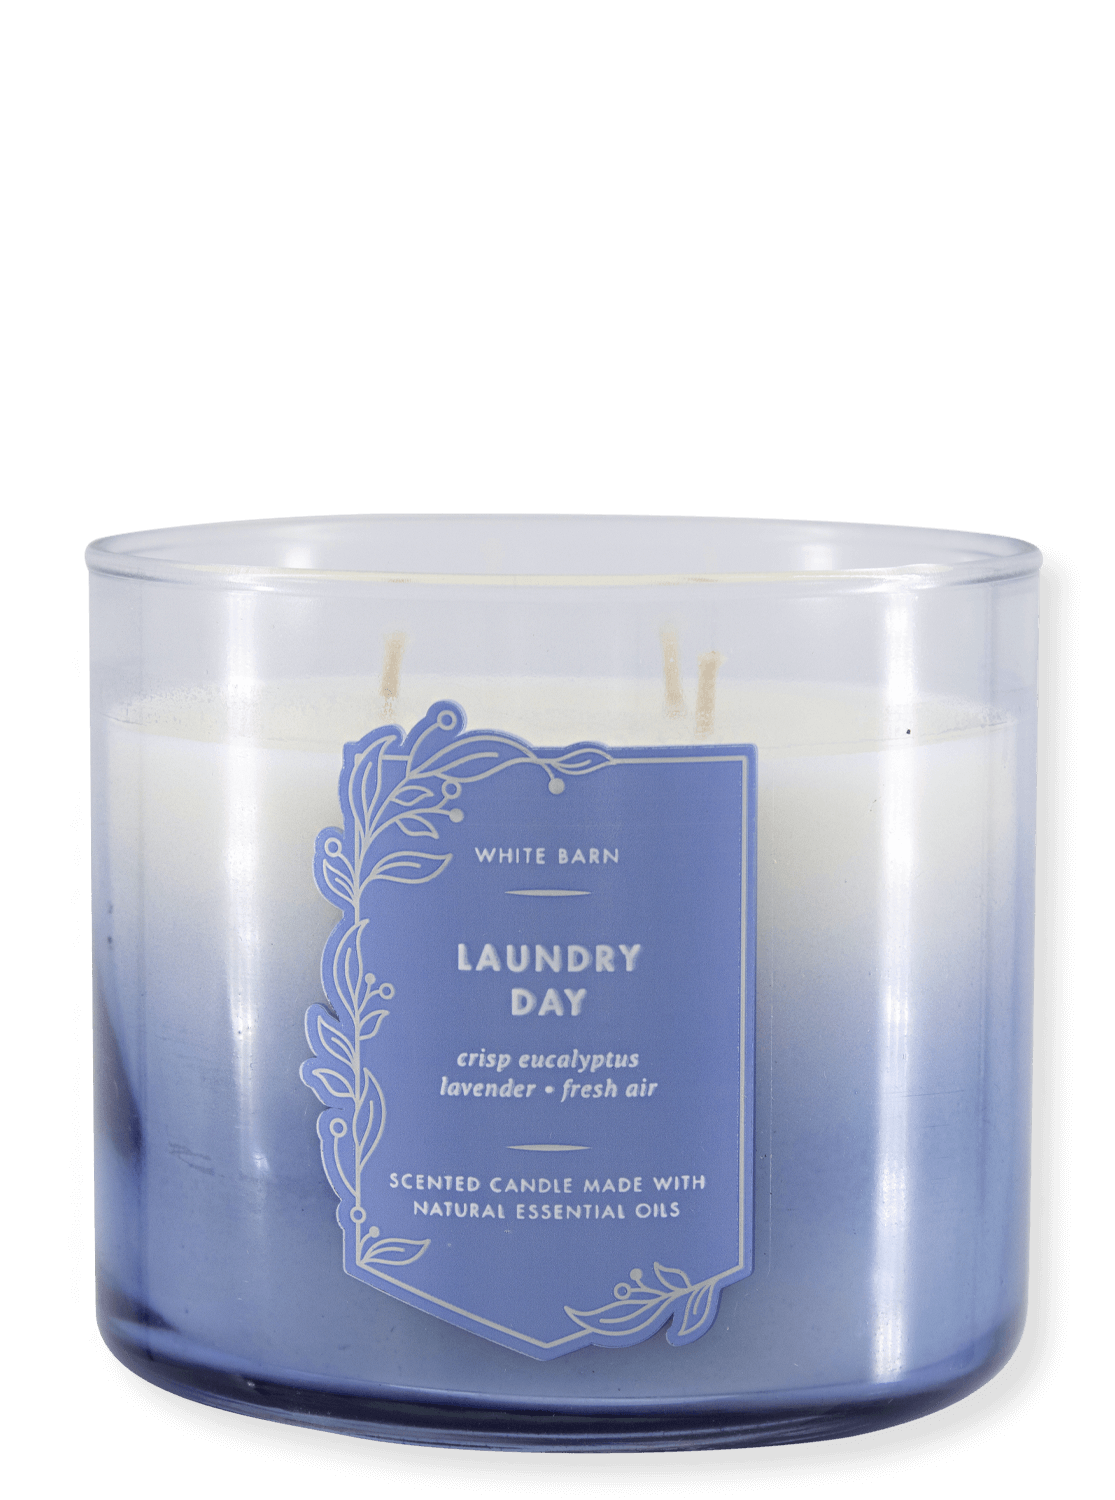 3-wick candle - Laundry Day - 411g